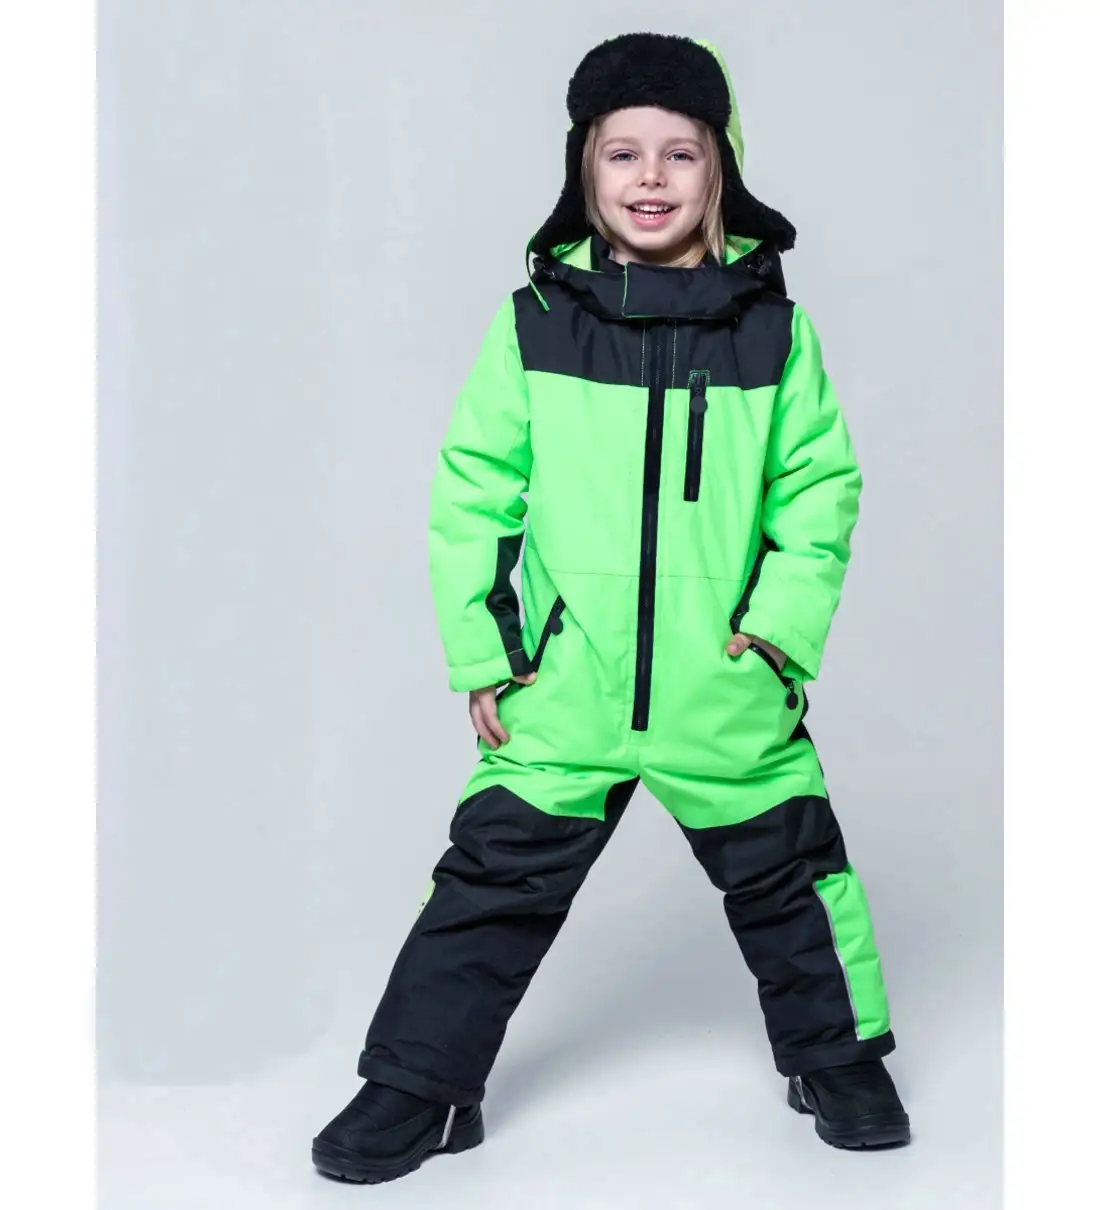 Jumpsuit with membrane fabric repels water and dirt windproof allows the skin to breathe Overalls for children